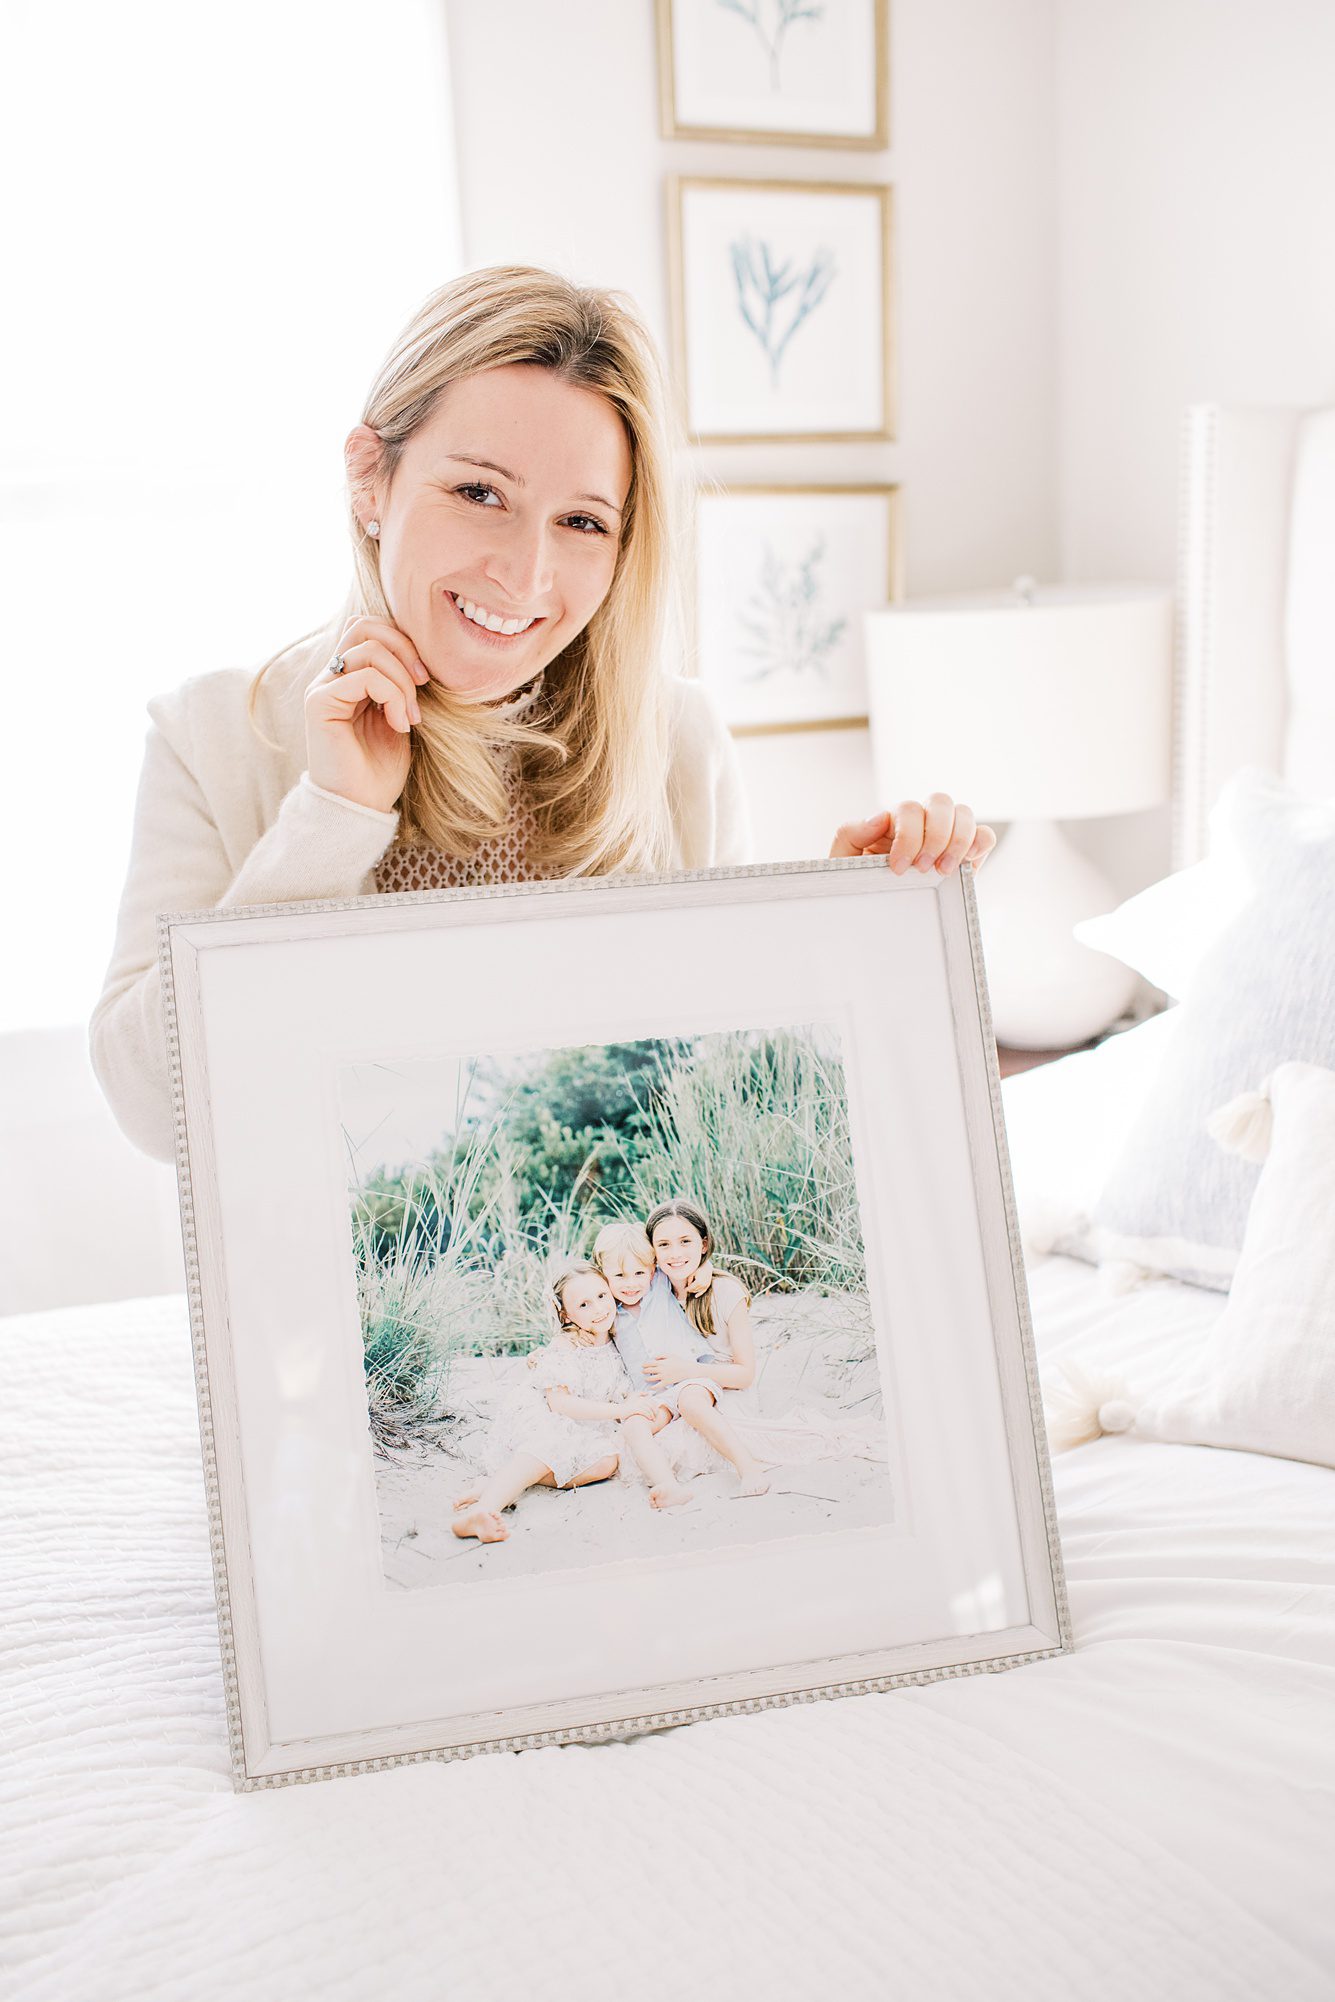 Lauren from LRG Portraits, a Washington DC Newborn Photographer, with a custom framing option for clients.